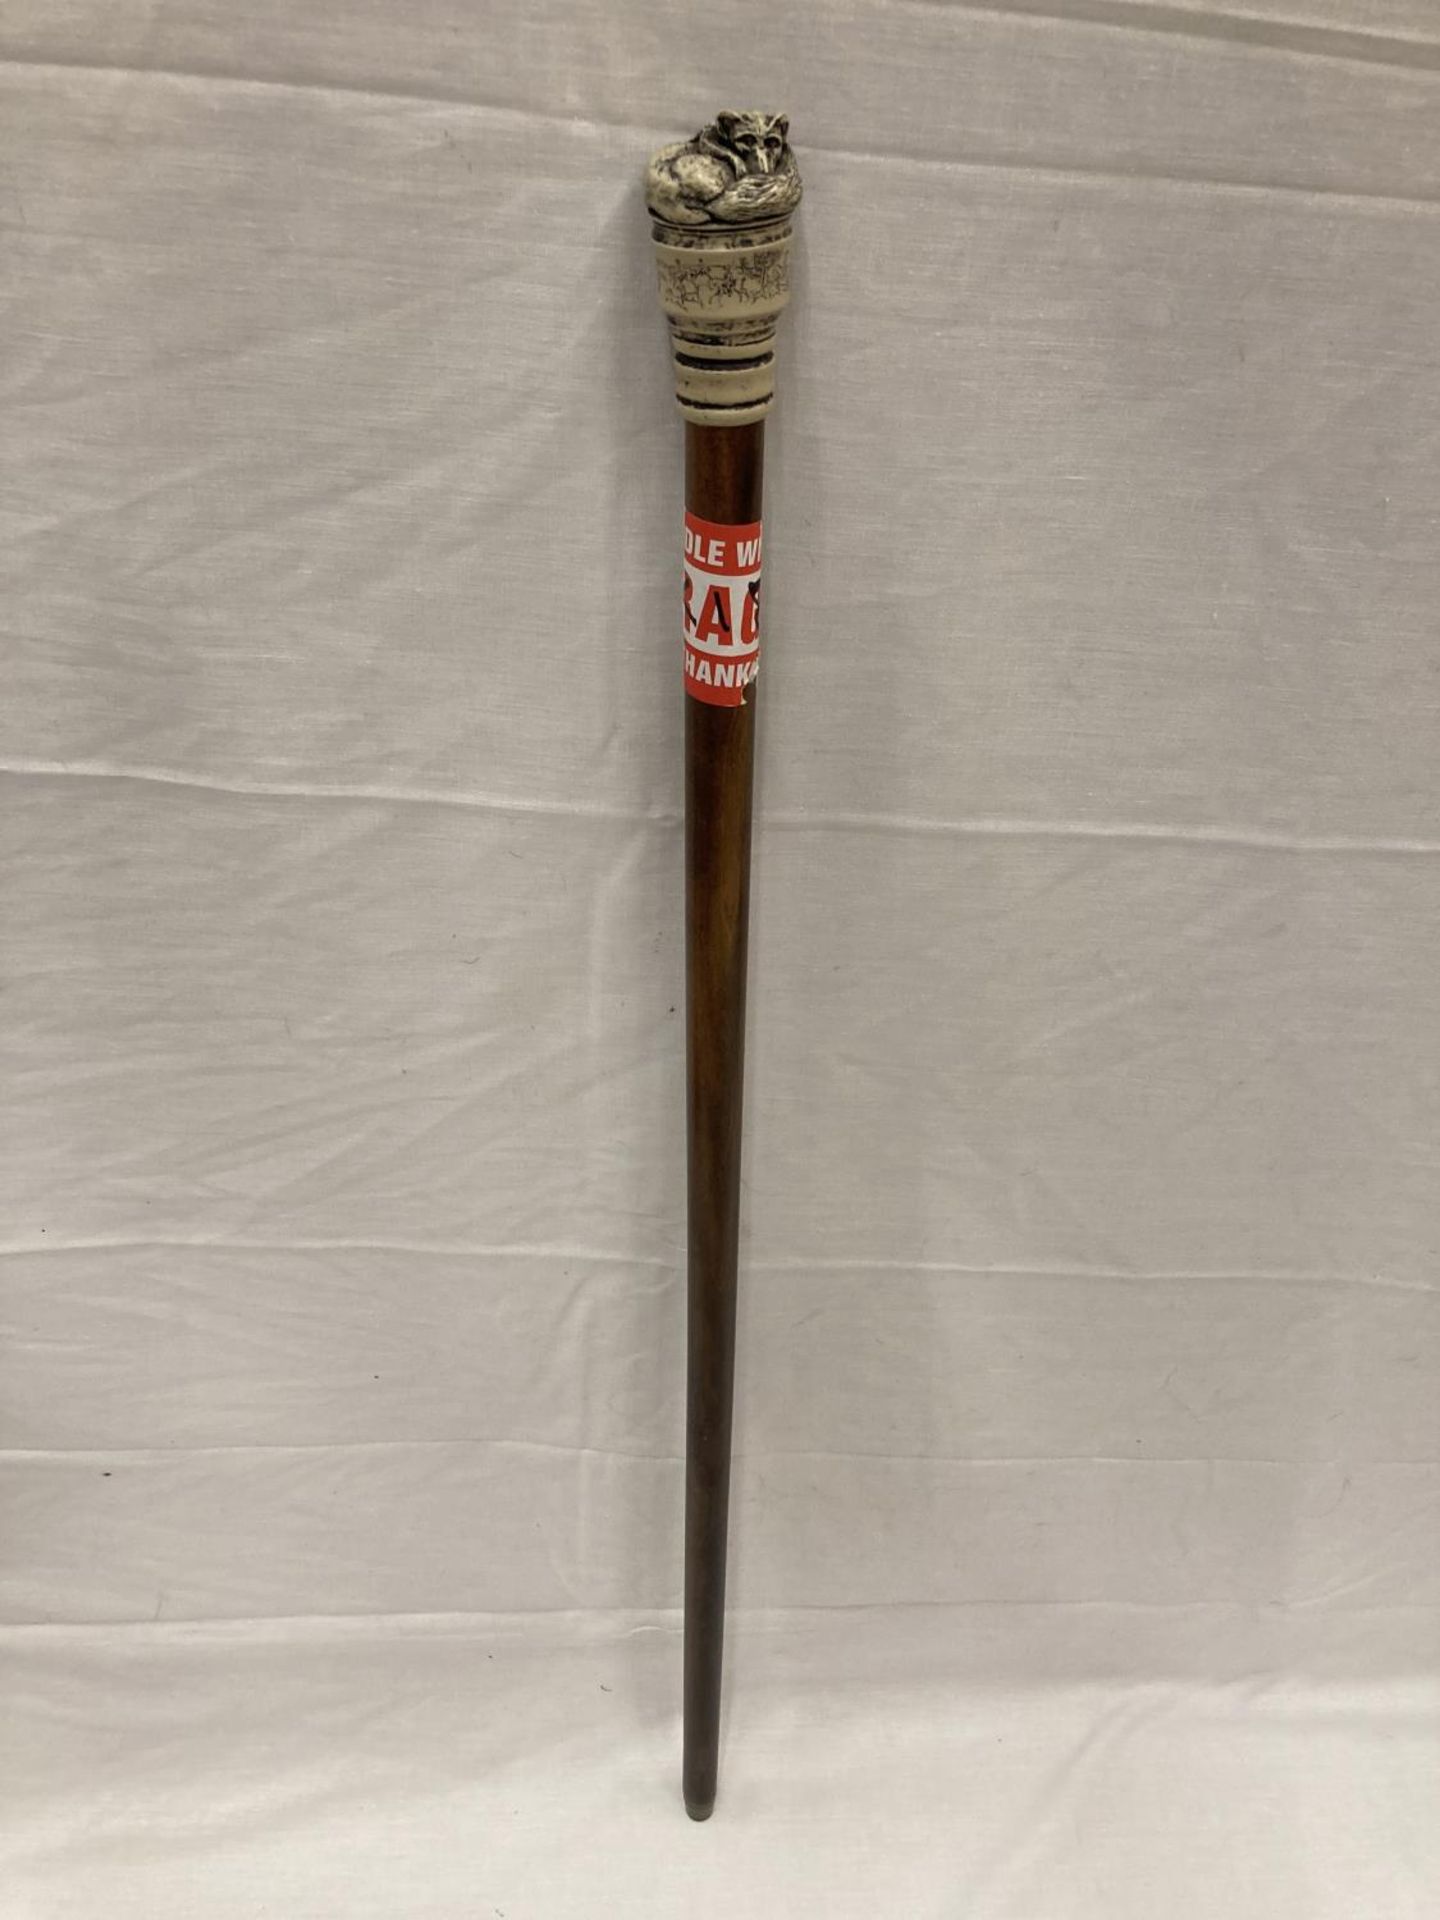 A WALKING CANE WITH A FOX FINIAL AND ENGRAVED HUNTING SCENE